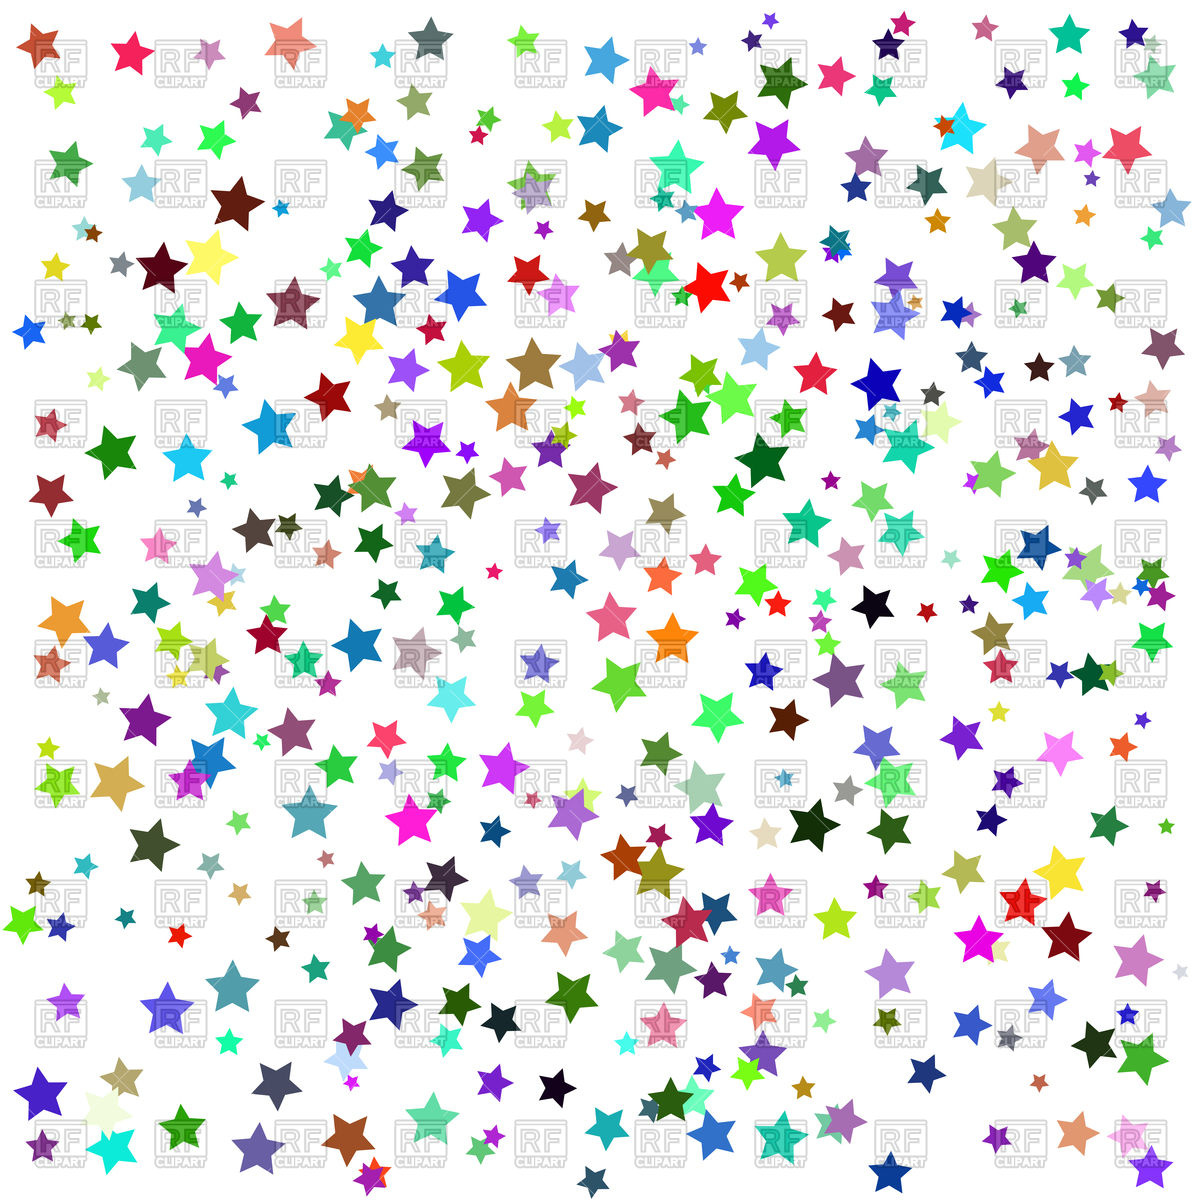 Free Star Background Cliparts, Download Free Clip Art, Free.